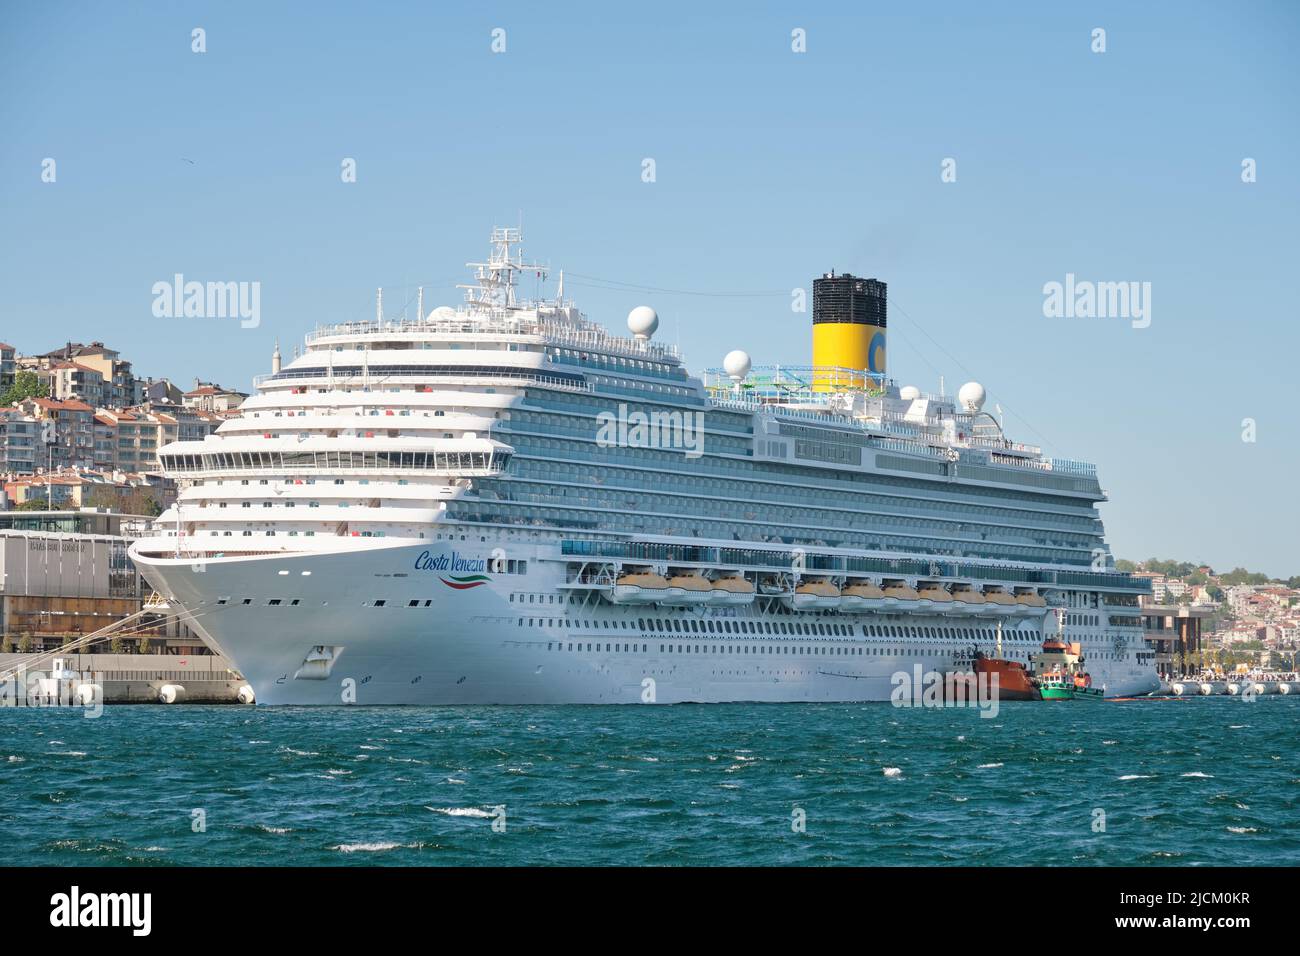 Cruise ship Costa Venezia docked at Galataport, a Vista-class cruise ship operated by Costa Cruises, a division of Carnival Corporation and plc. Stock Photo